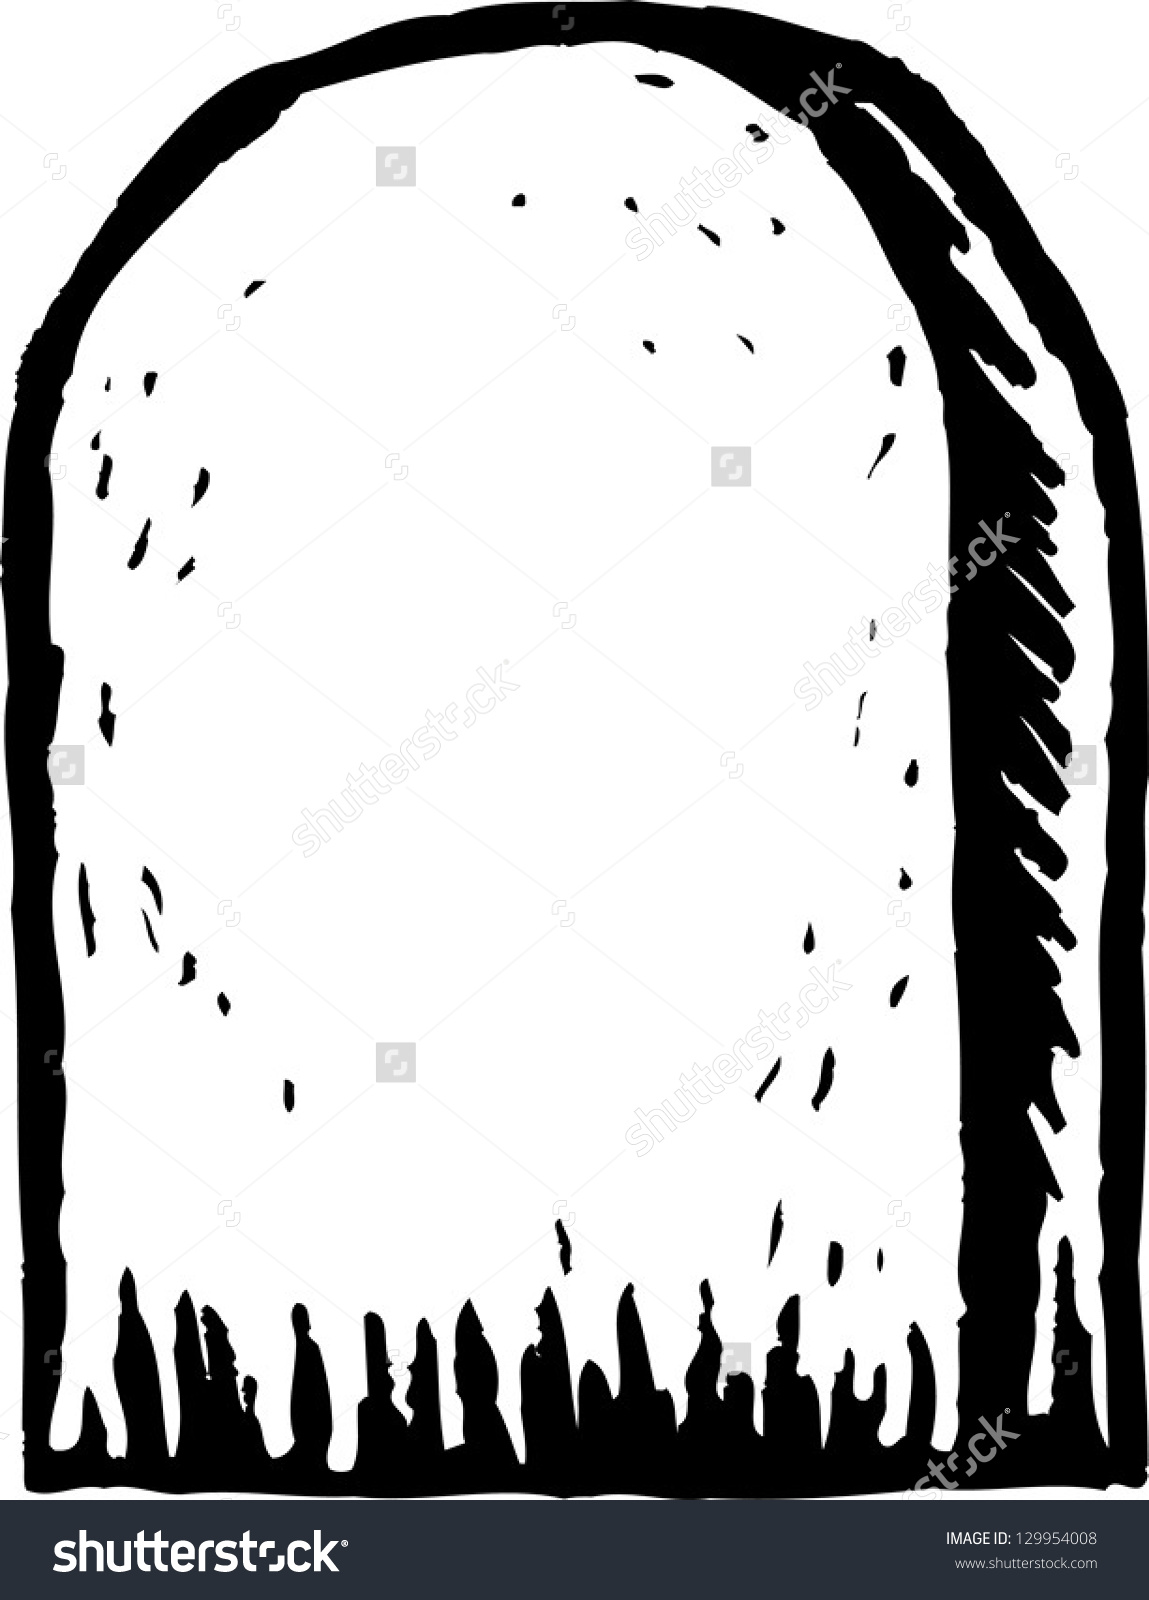 tombstone clipart black and white - Clipground